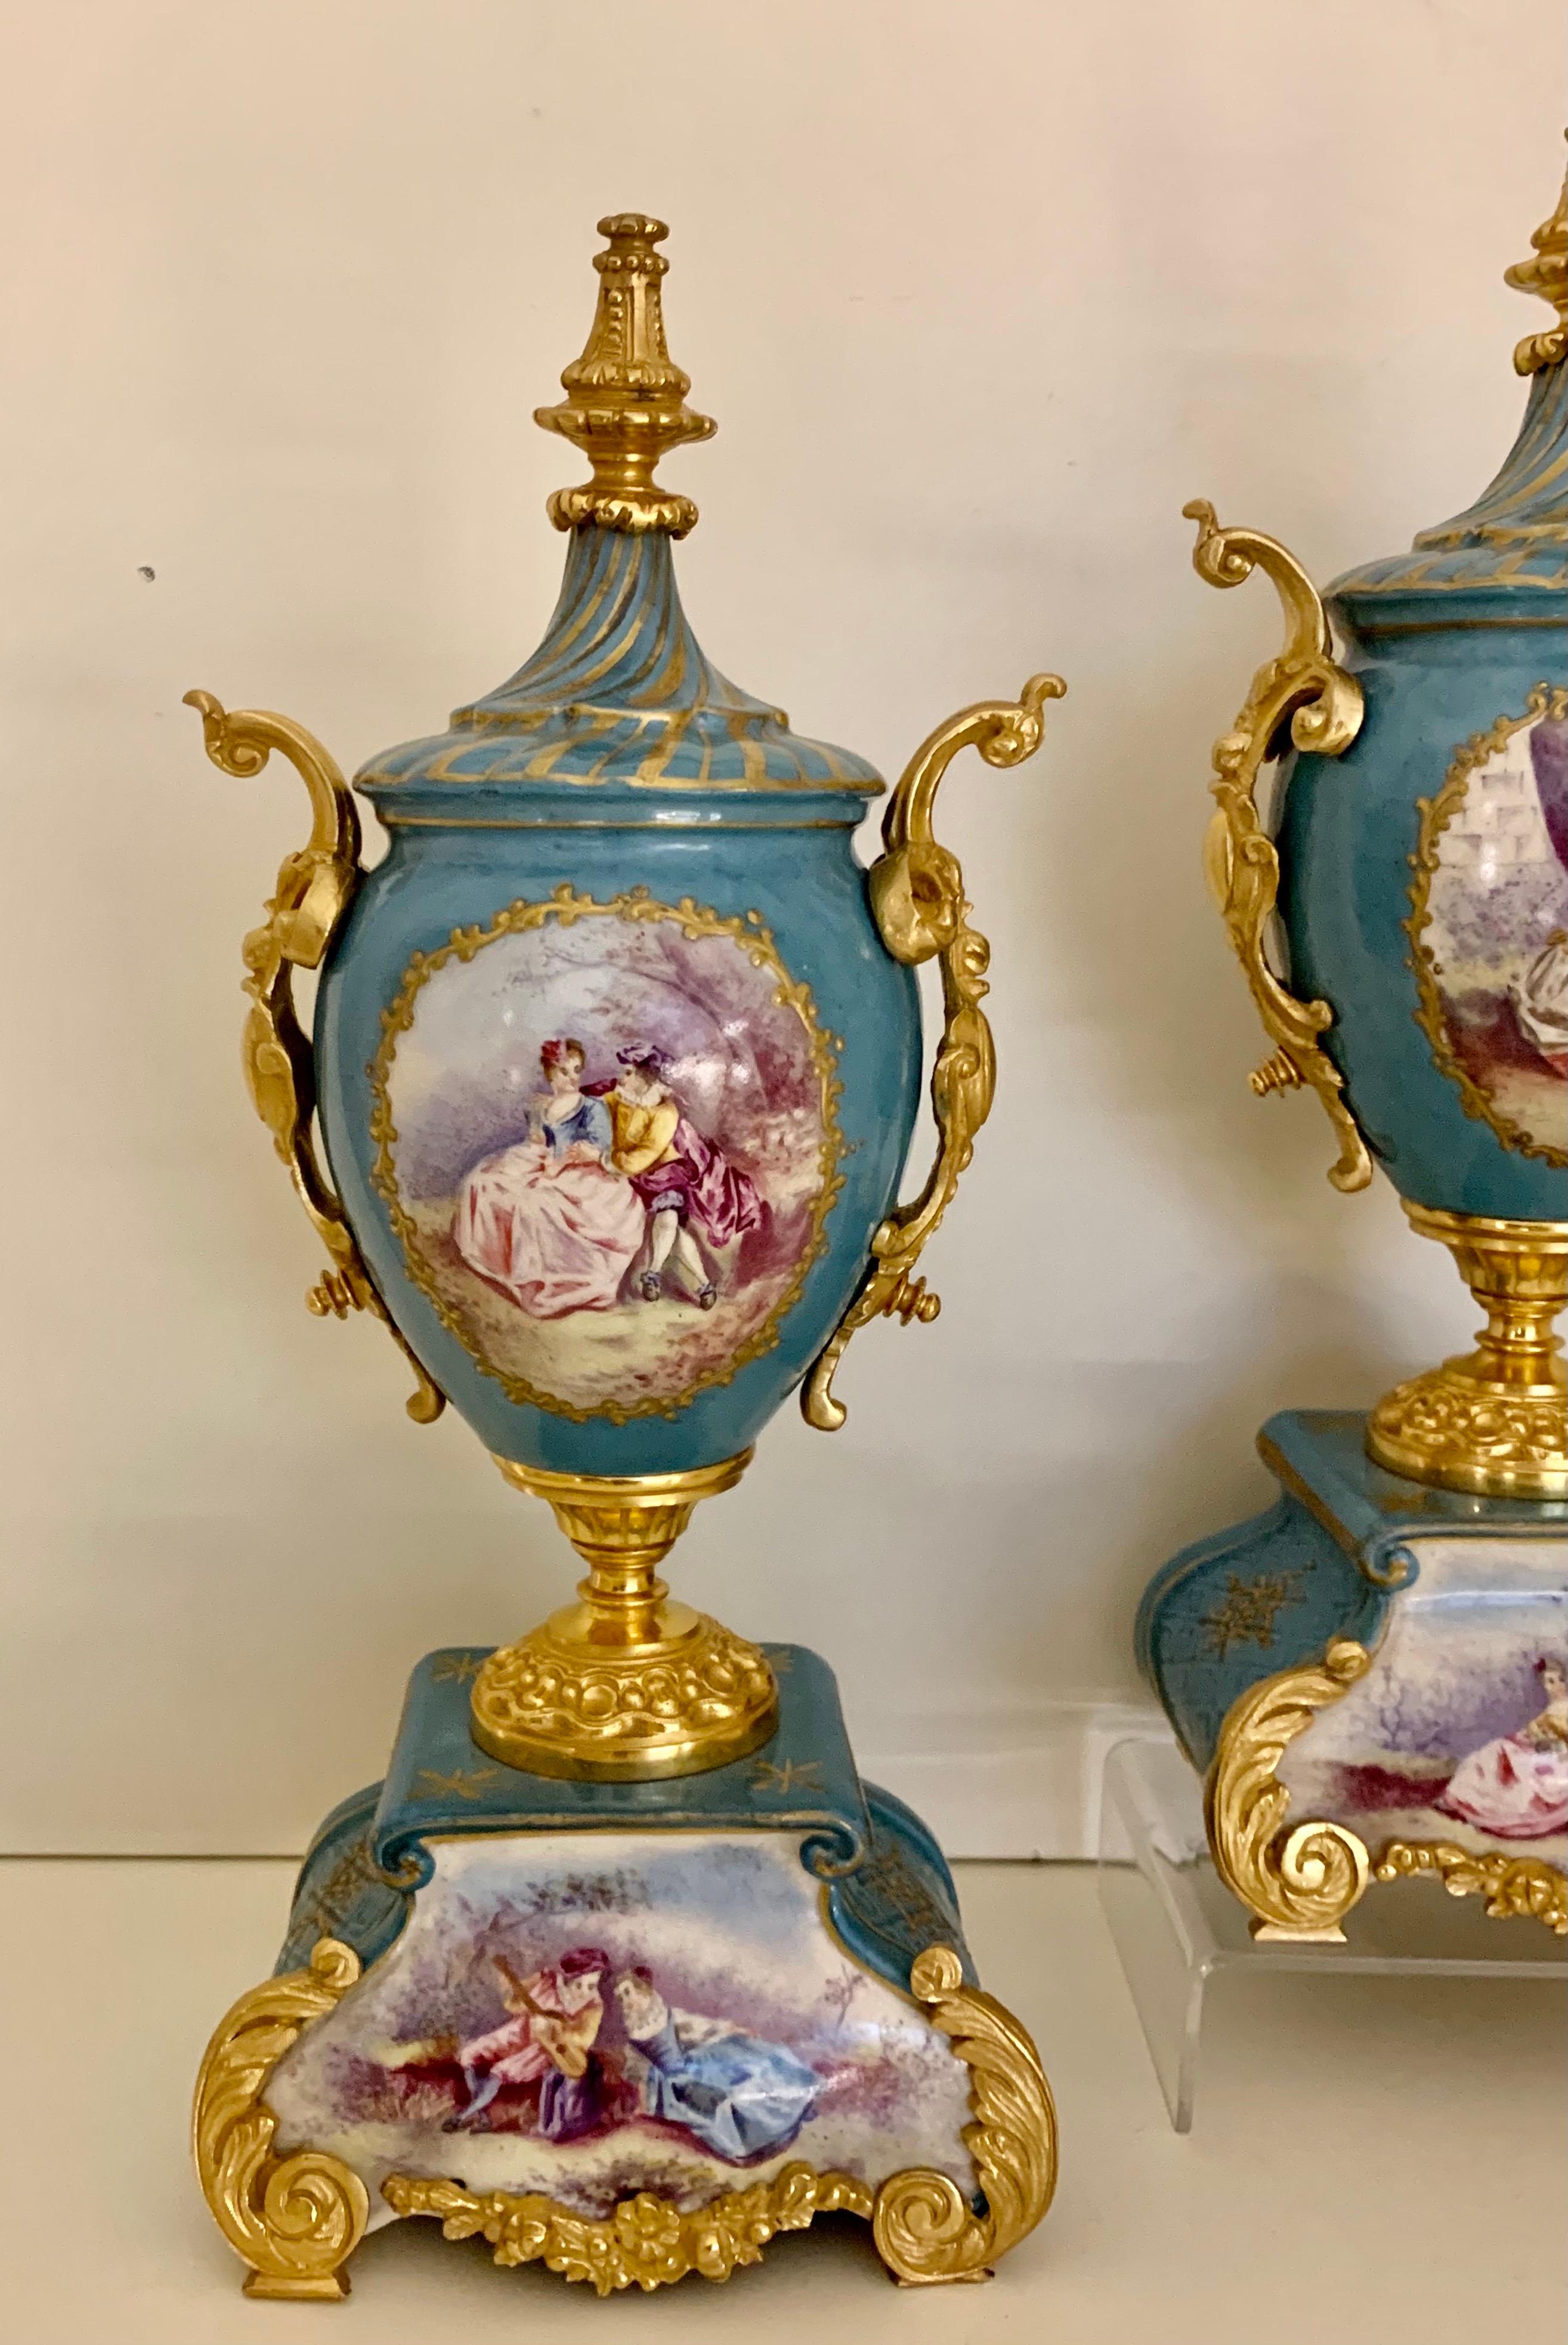 A pair of sevres style porcelain and gilt bronze mounted vases of baluster form, having gilt Rococo decoration throughout, Hand painted with a scene of 2 lovers in a garden. These are unusual because they have another painted scene to the bases or